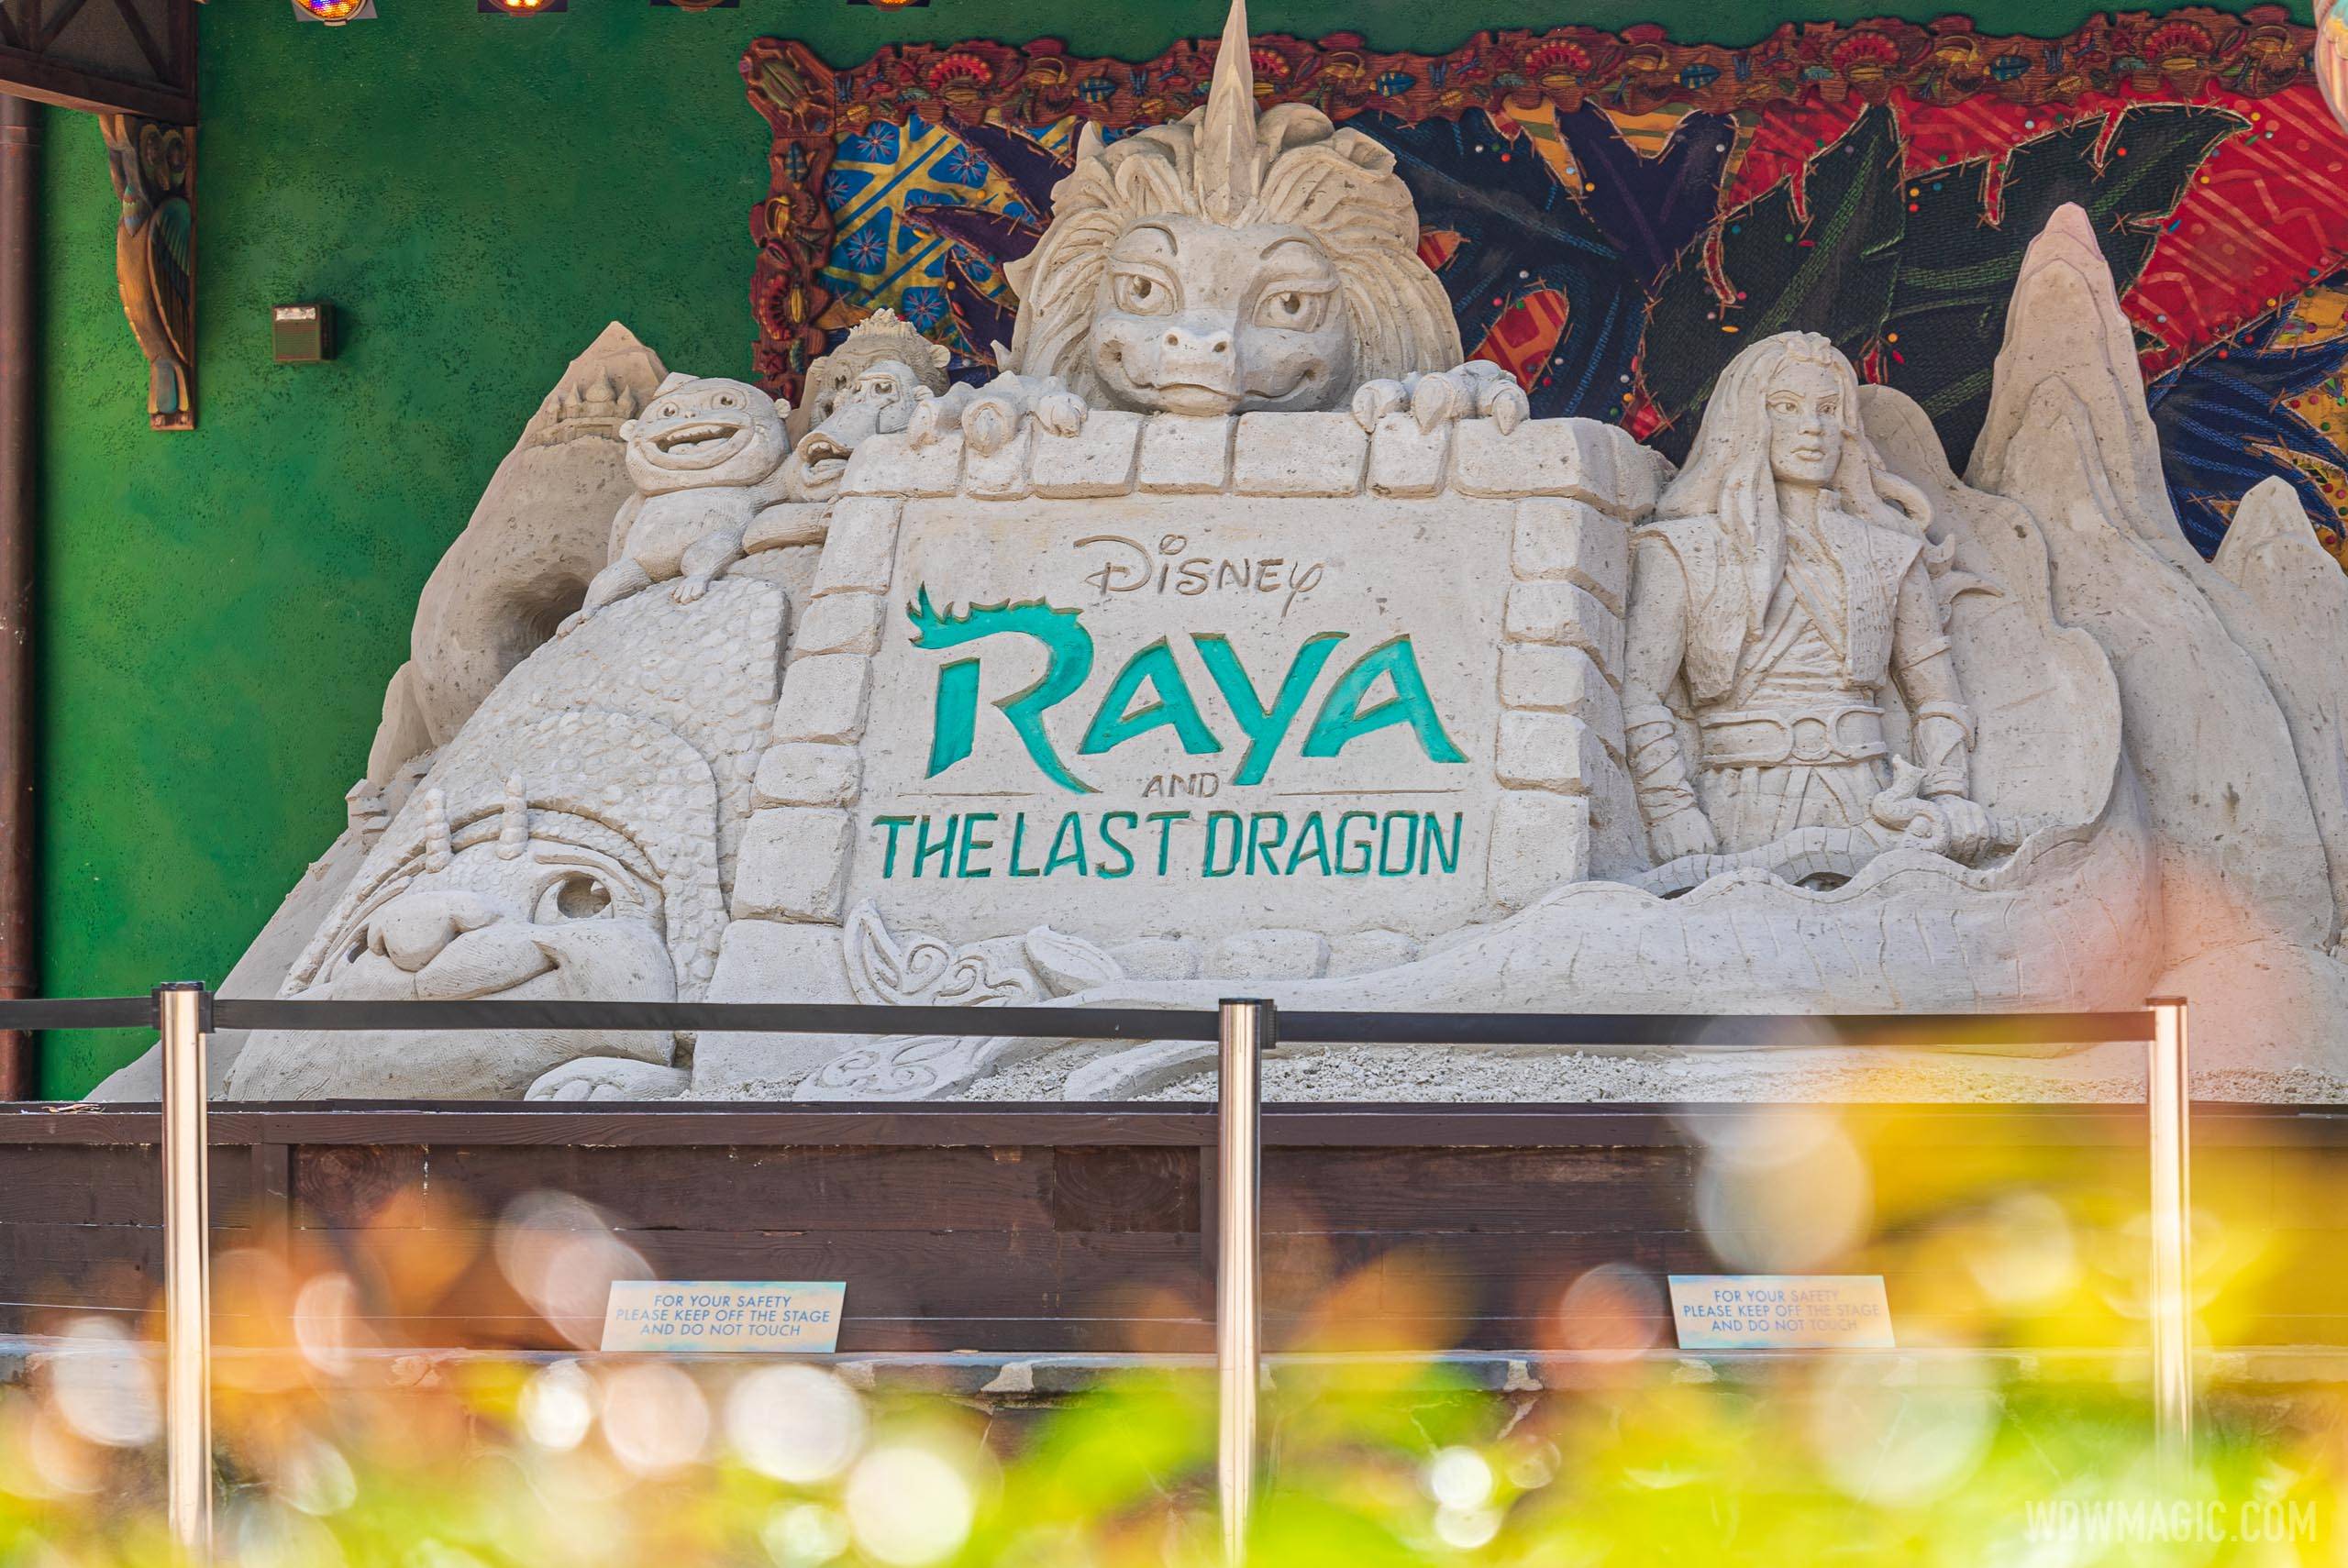 PHOTOS - A look at the completed 'Raya and the Last Dragon' sand sculpture at Disney's Animal Kingdom